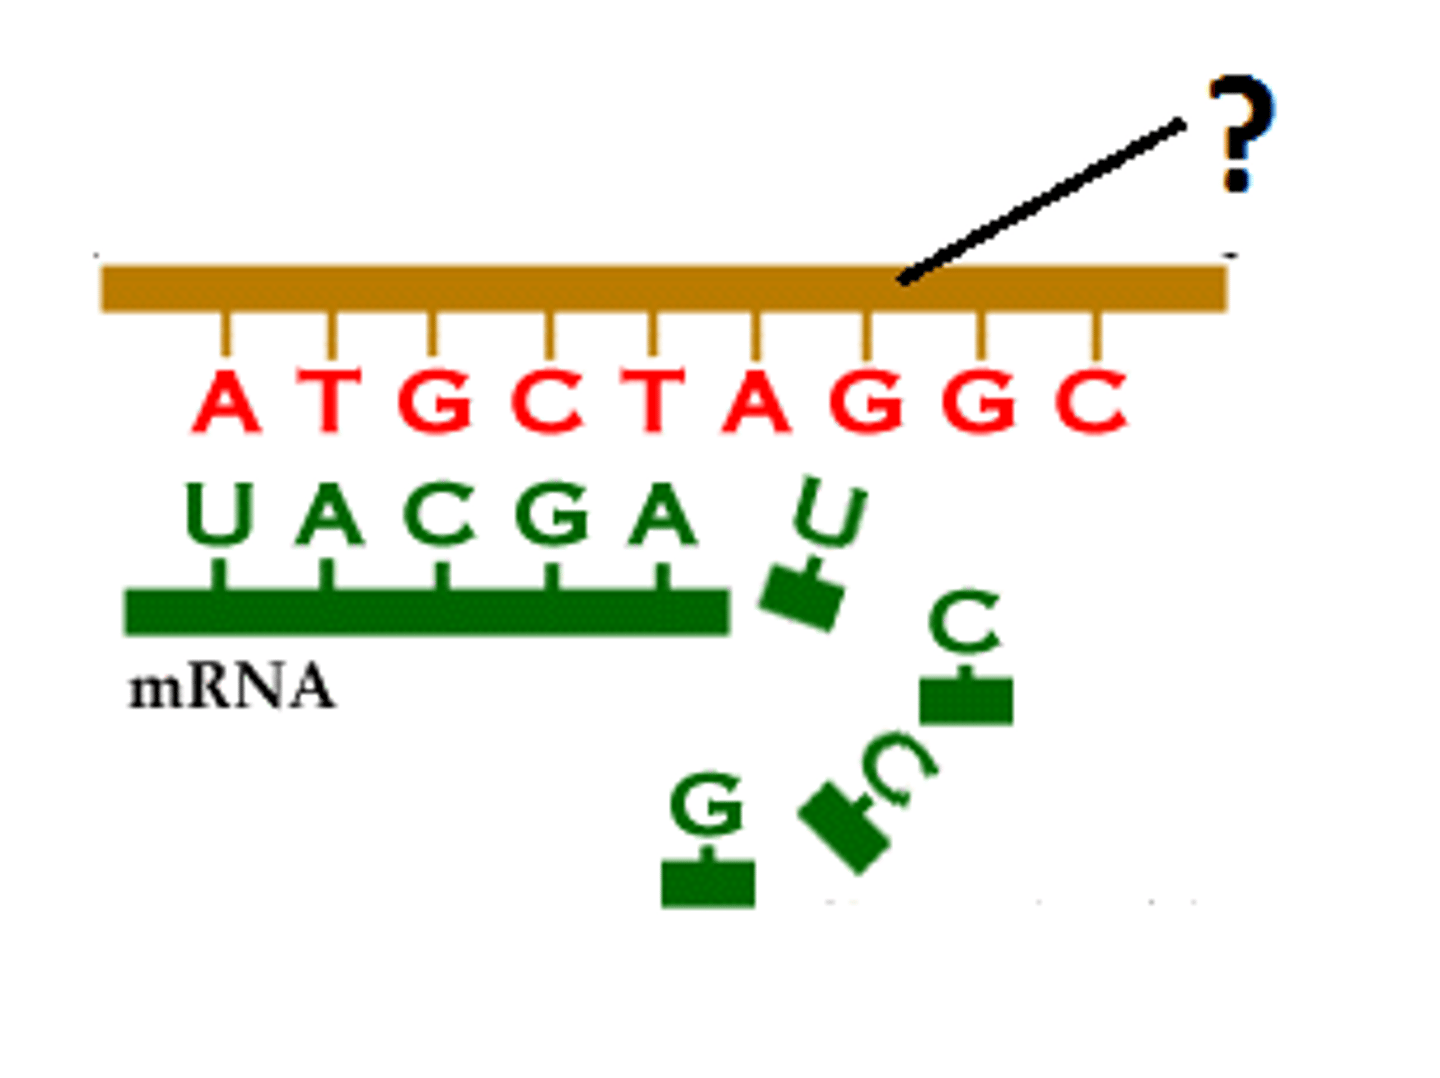 <p>the DNA strand that provides the pattern, or template, for ordering, by complementary base pairing, the sequence of nucleotides in an RNA transcript</p>